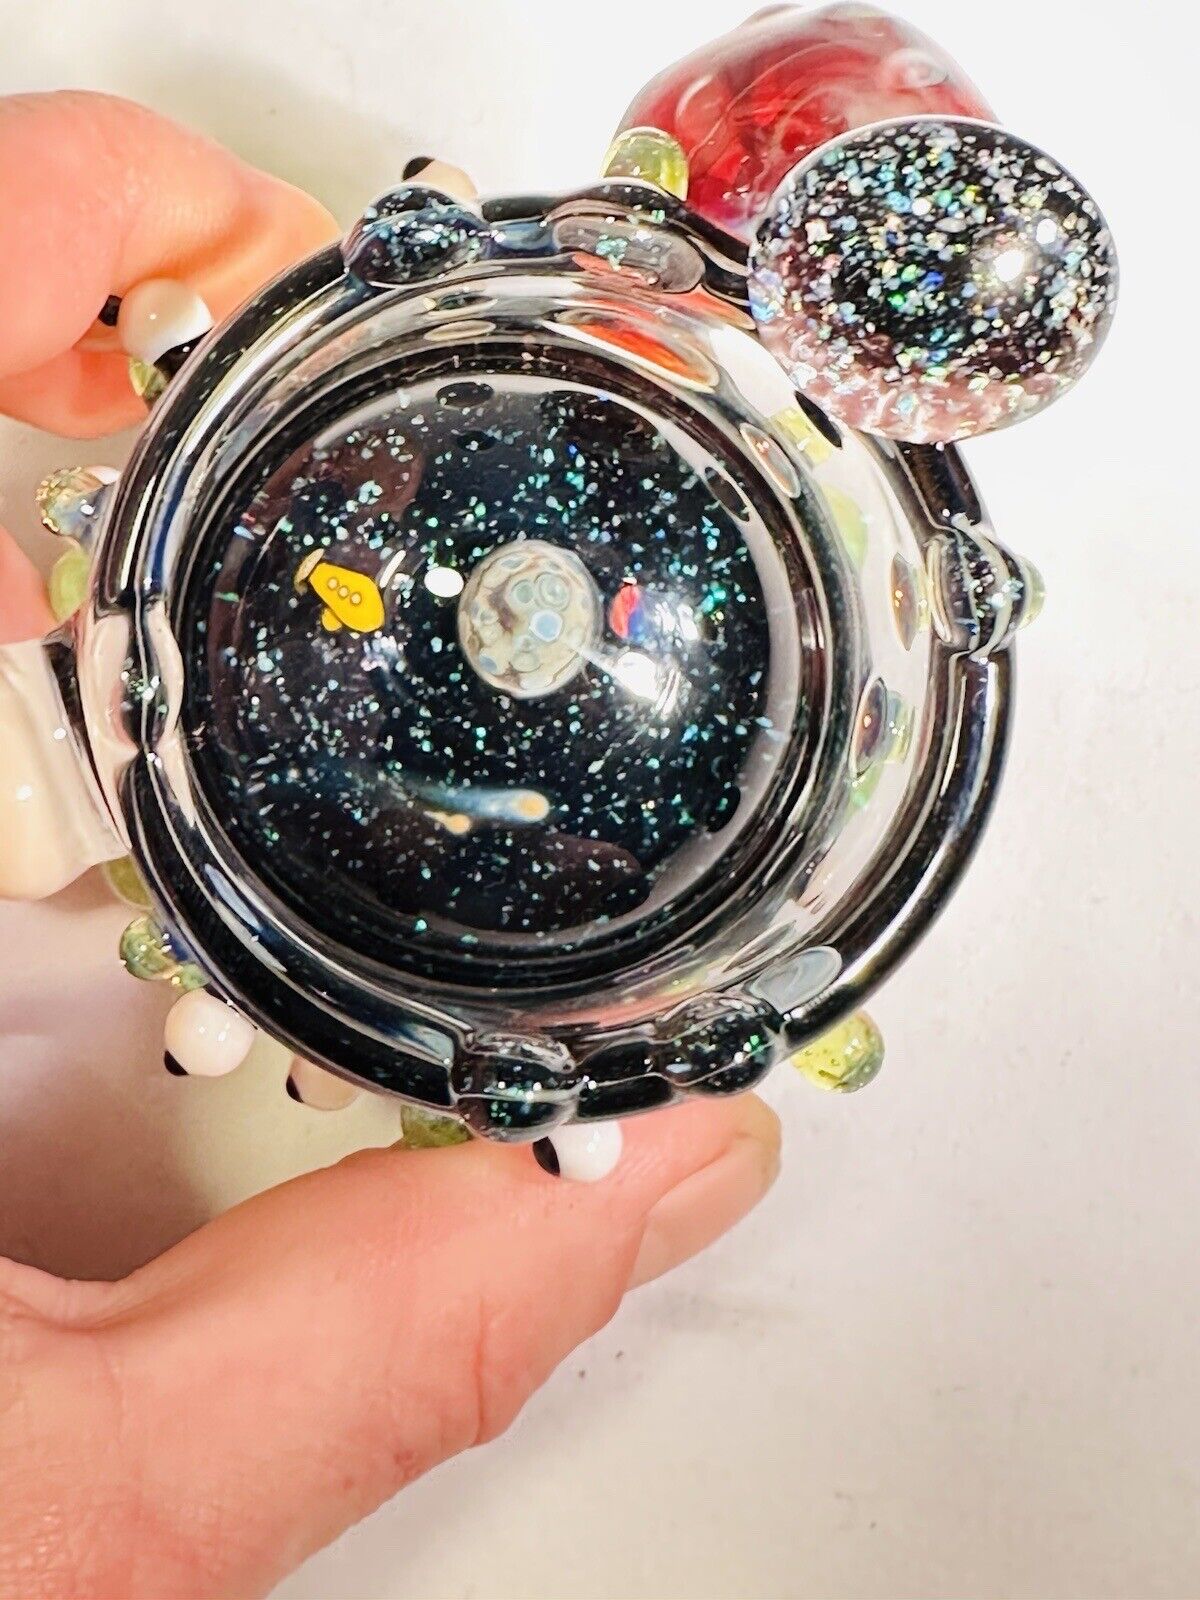 Amazing Hand blown Glass Galaxy Ashtray One Of A Kind. Opals. By Ryan Messner